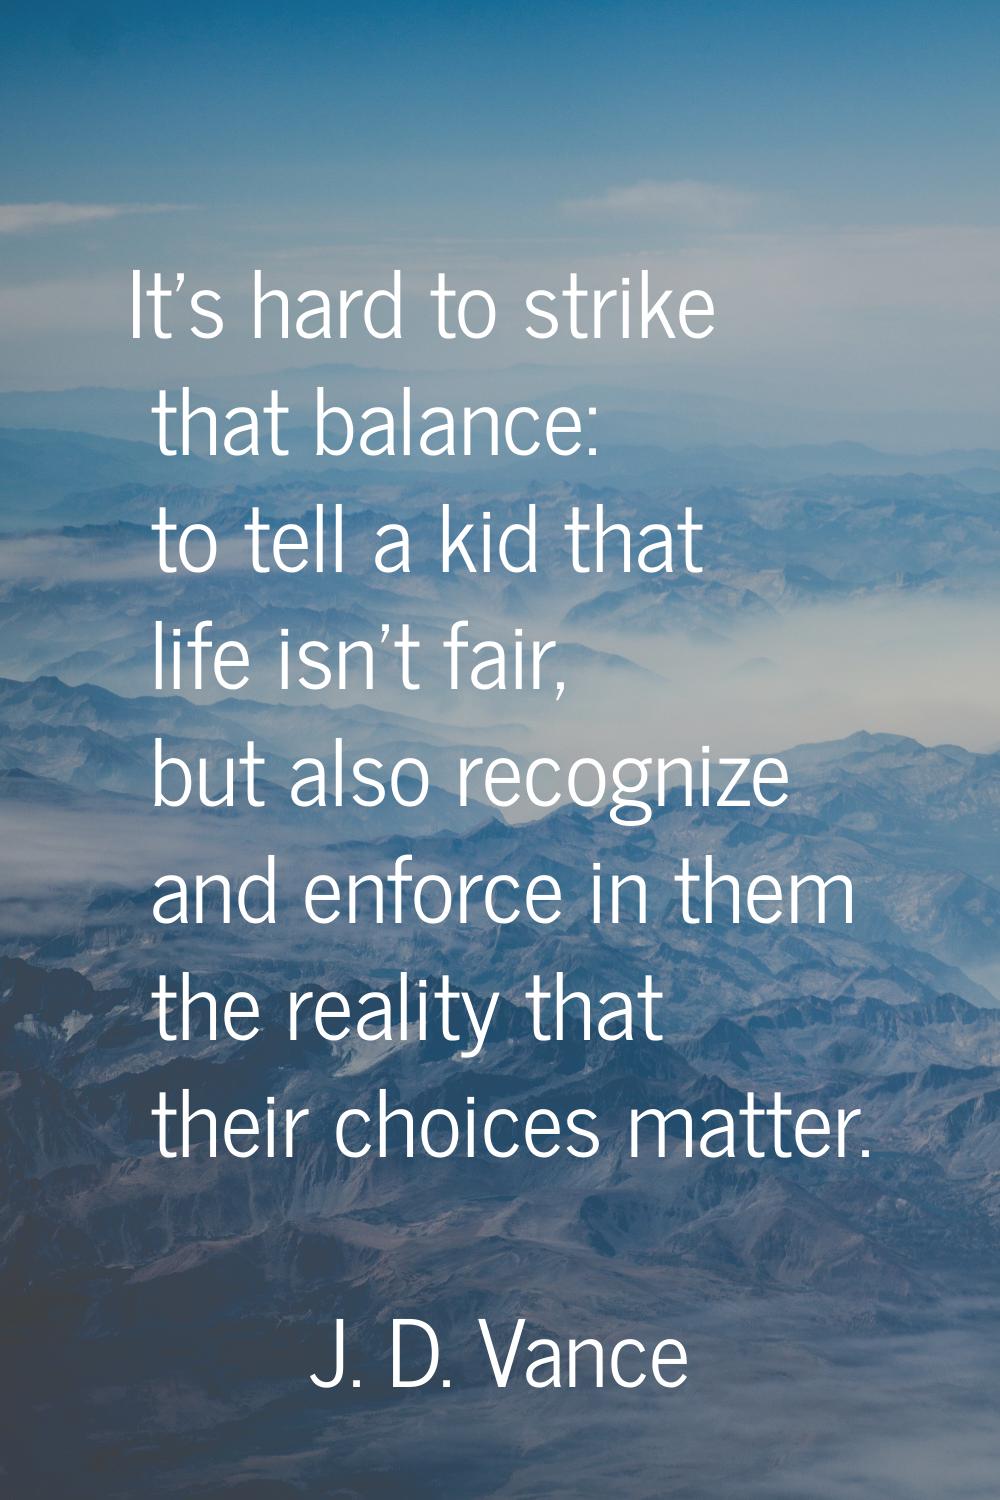 It's hard to strike that balance: to tell a kid that life isn't fair, but also recognize and enforc